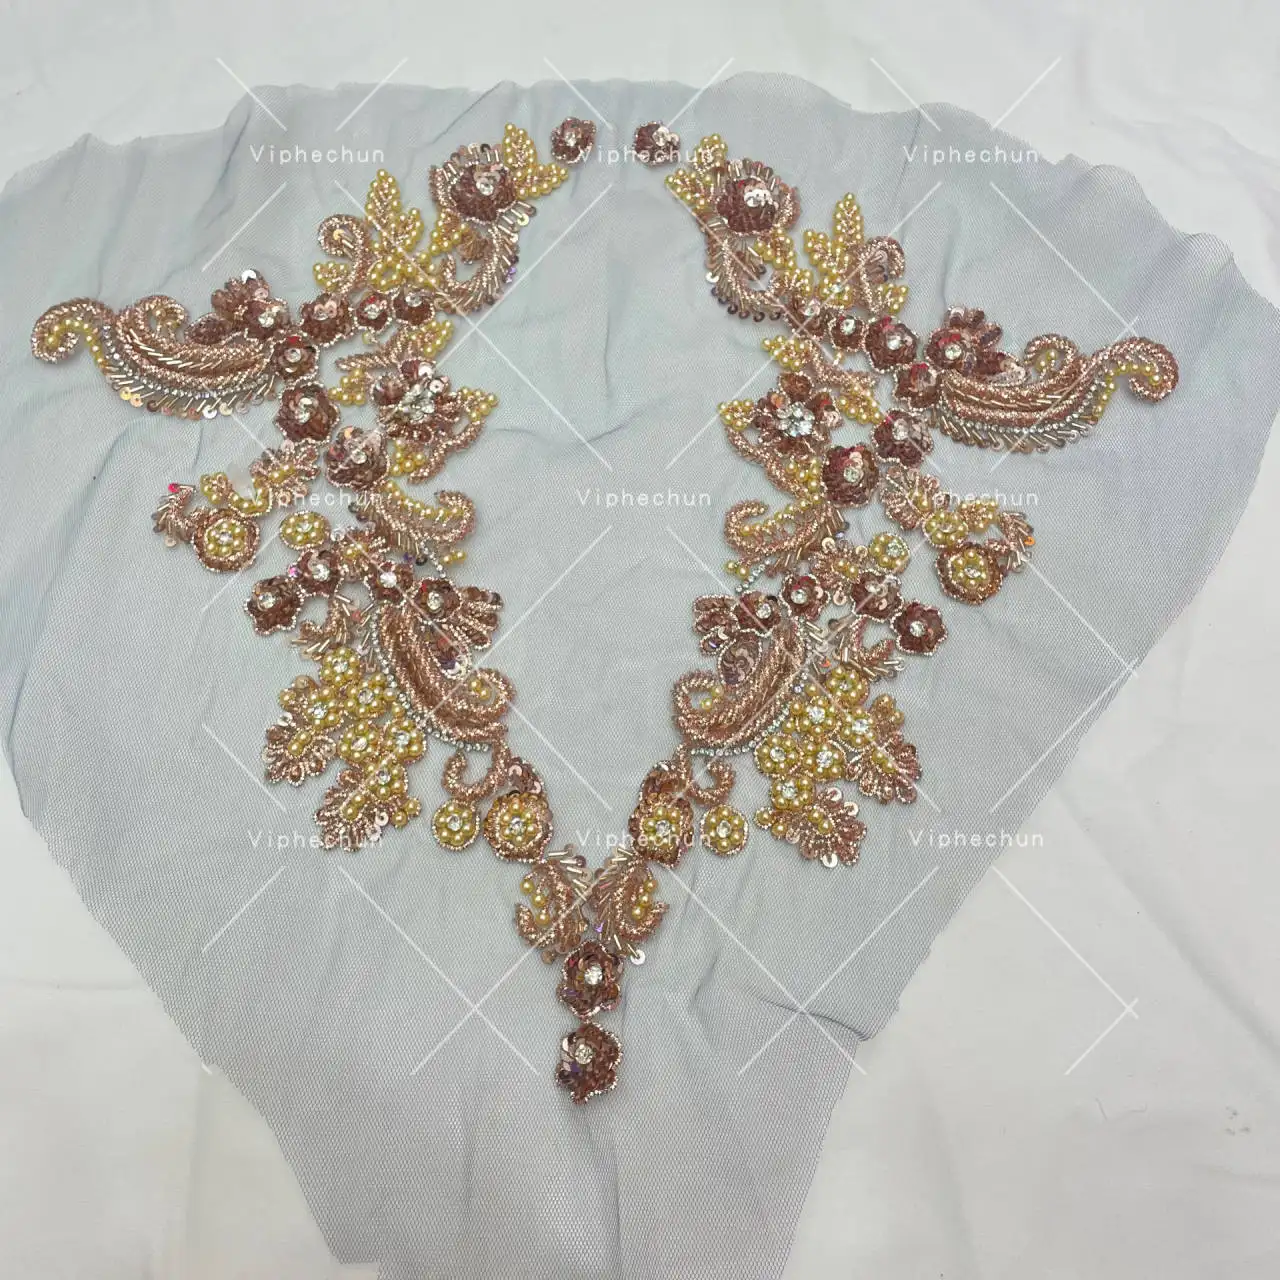 Designer full body embroidiery designs crystal bodice applique for wedding fabric gold lace applique